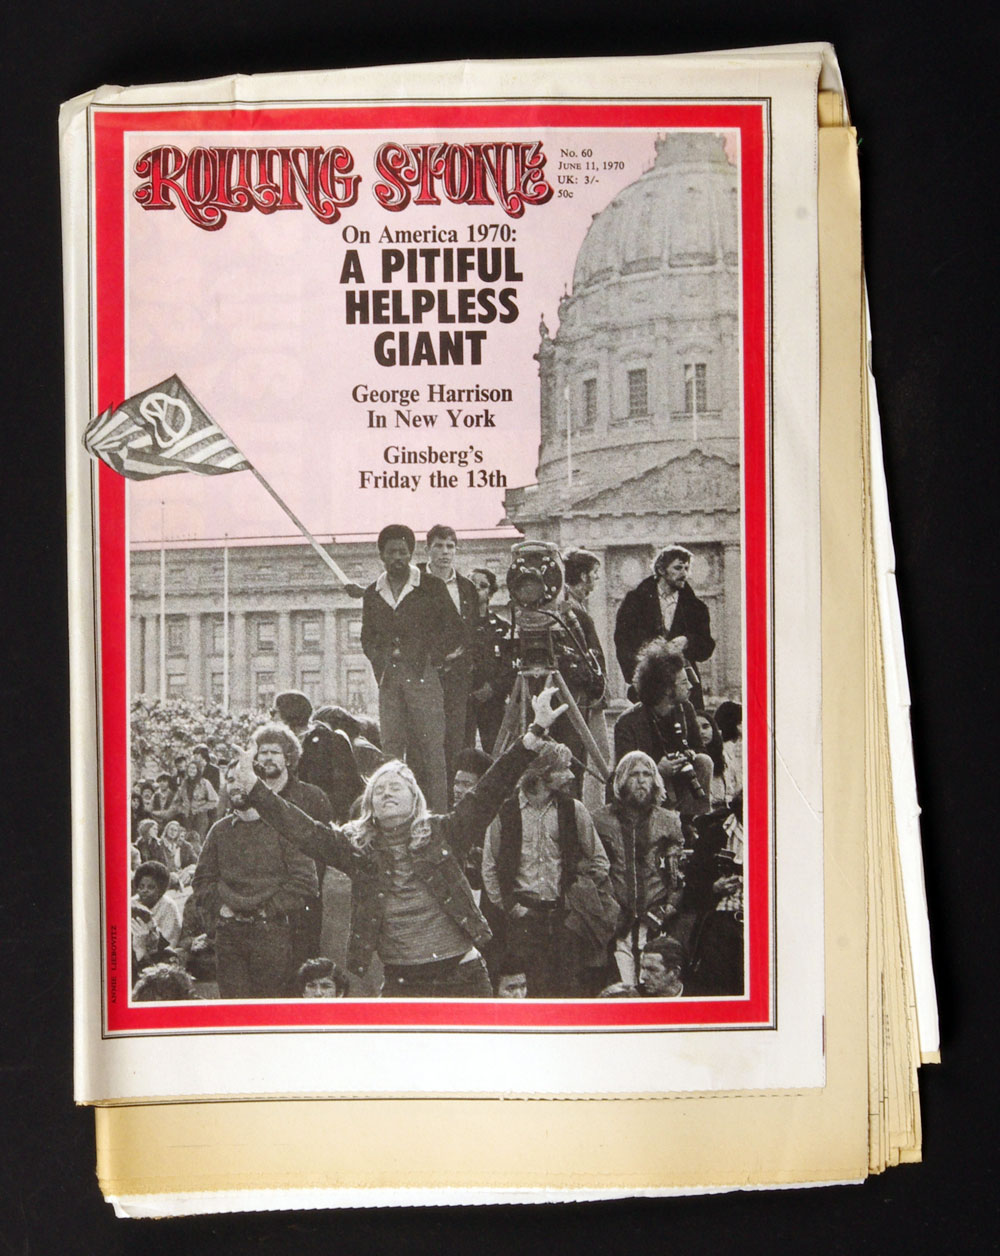 Rolling Stone Magazine Back Issue 1970 Jun 11 No. 60 A Pitiful Helpless Giant